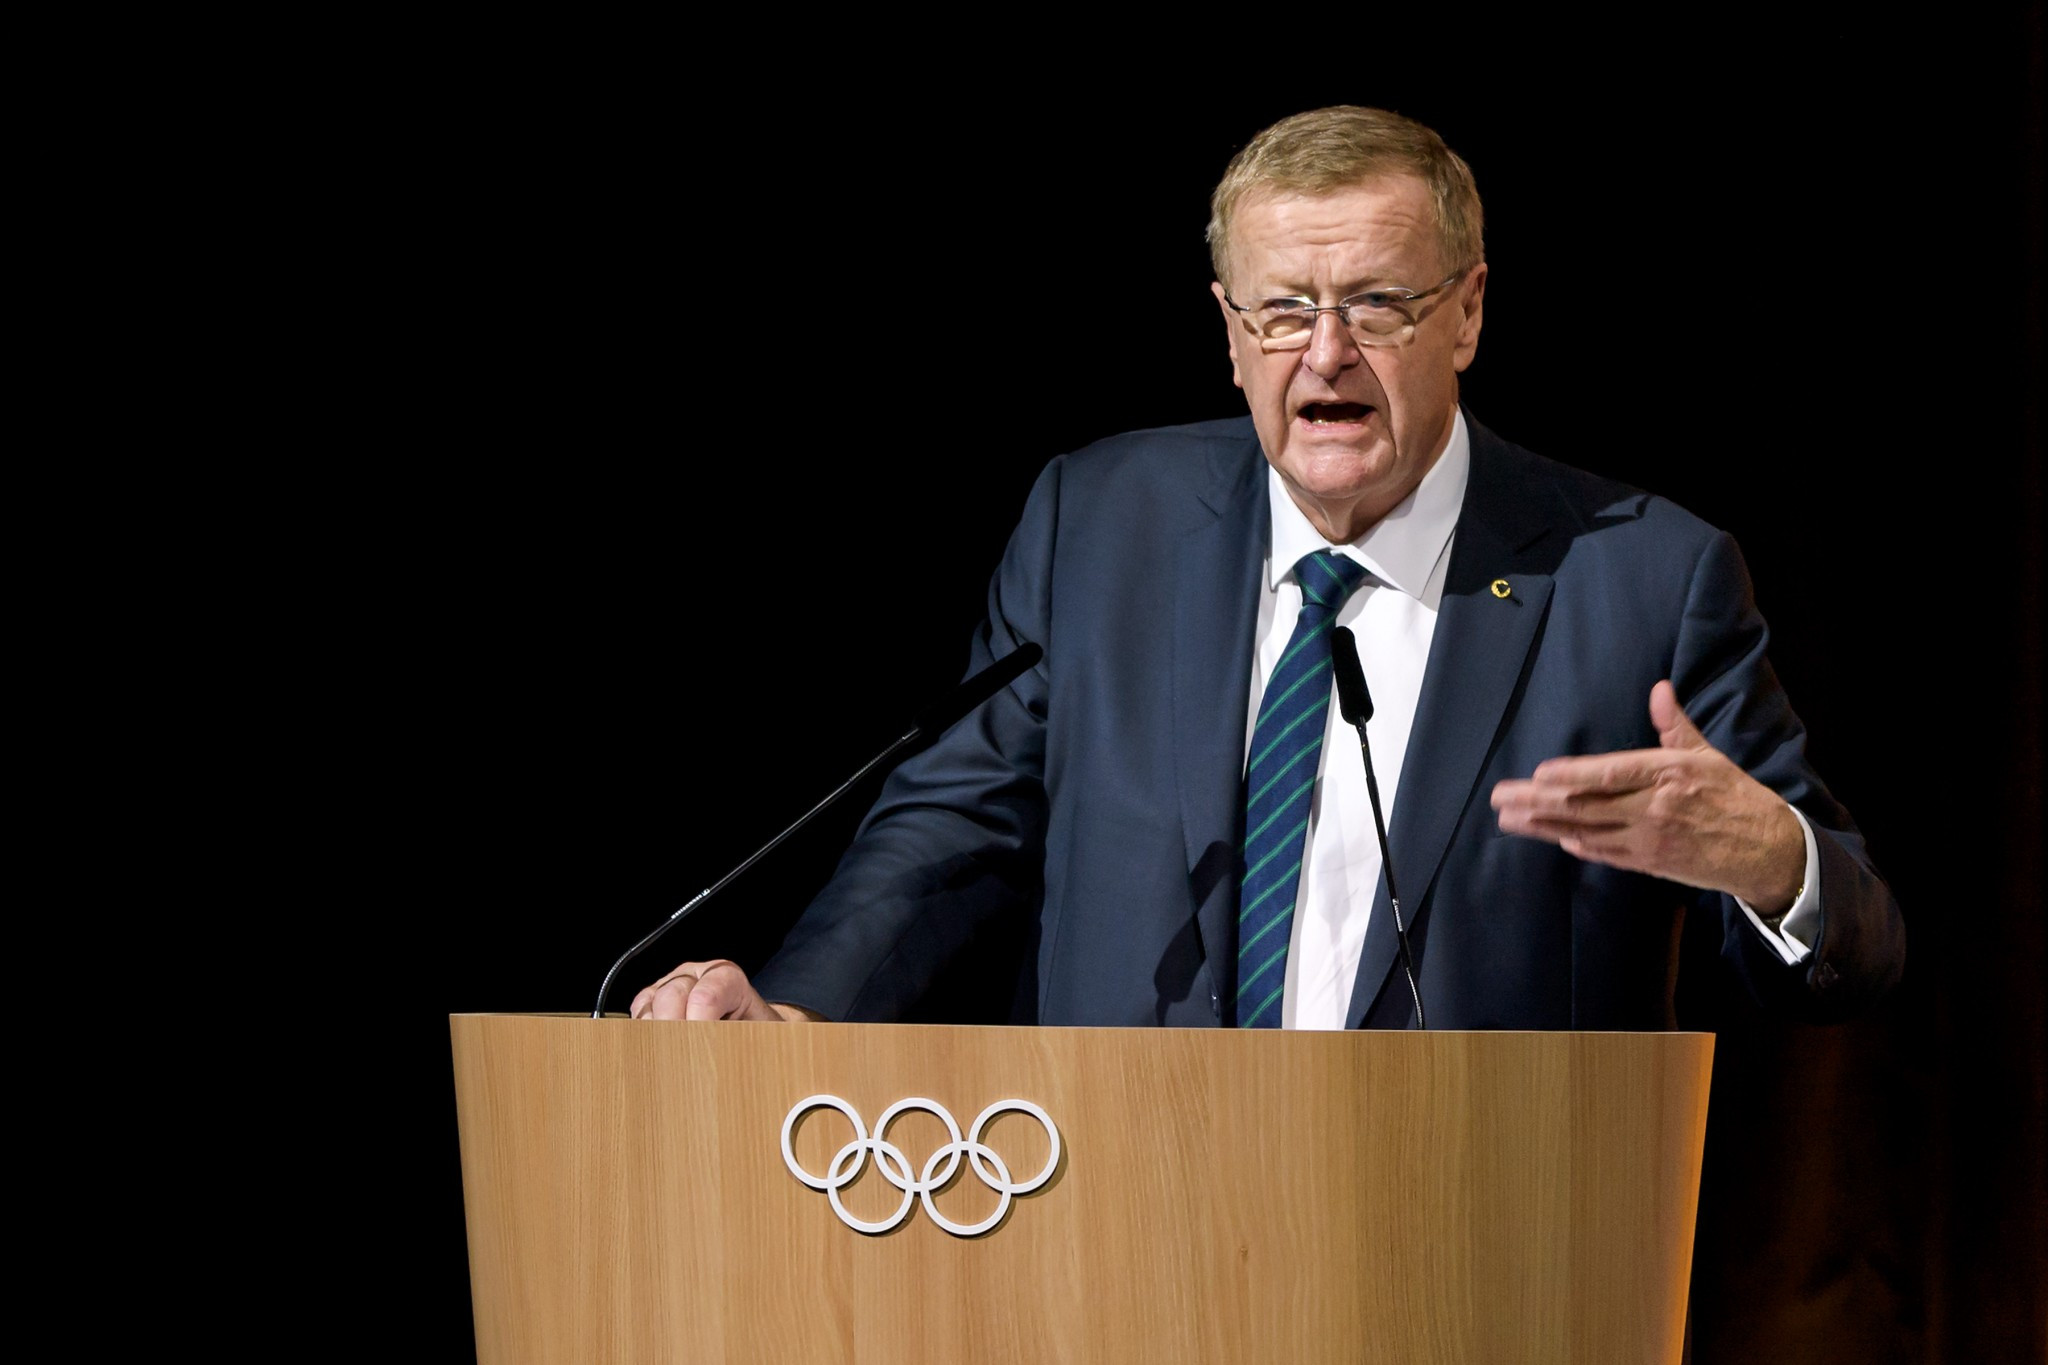 The review from The Ethics Centre will make uncomfortable reading for IOC vice-president John Coates, but the AOC President's knowledge was viewed as an asset to the organisation ©Getty Images